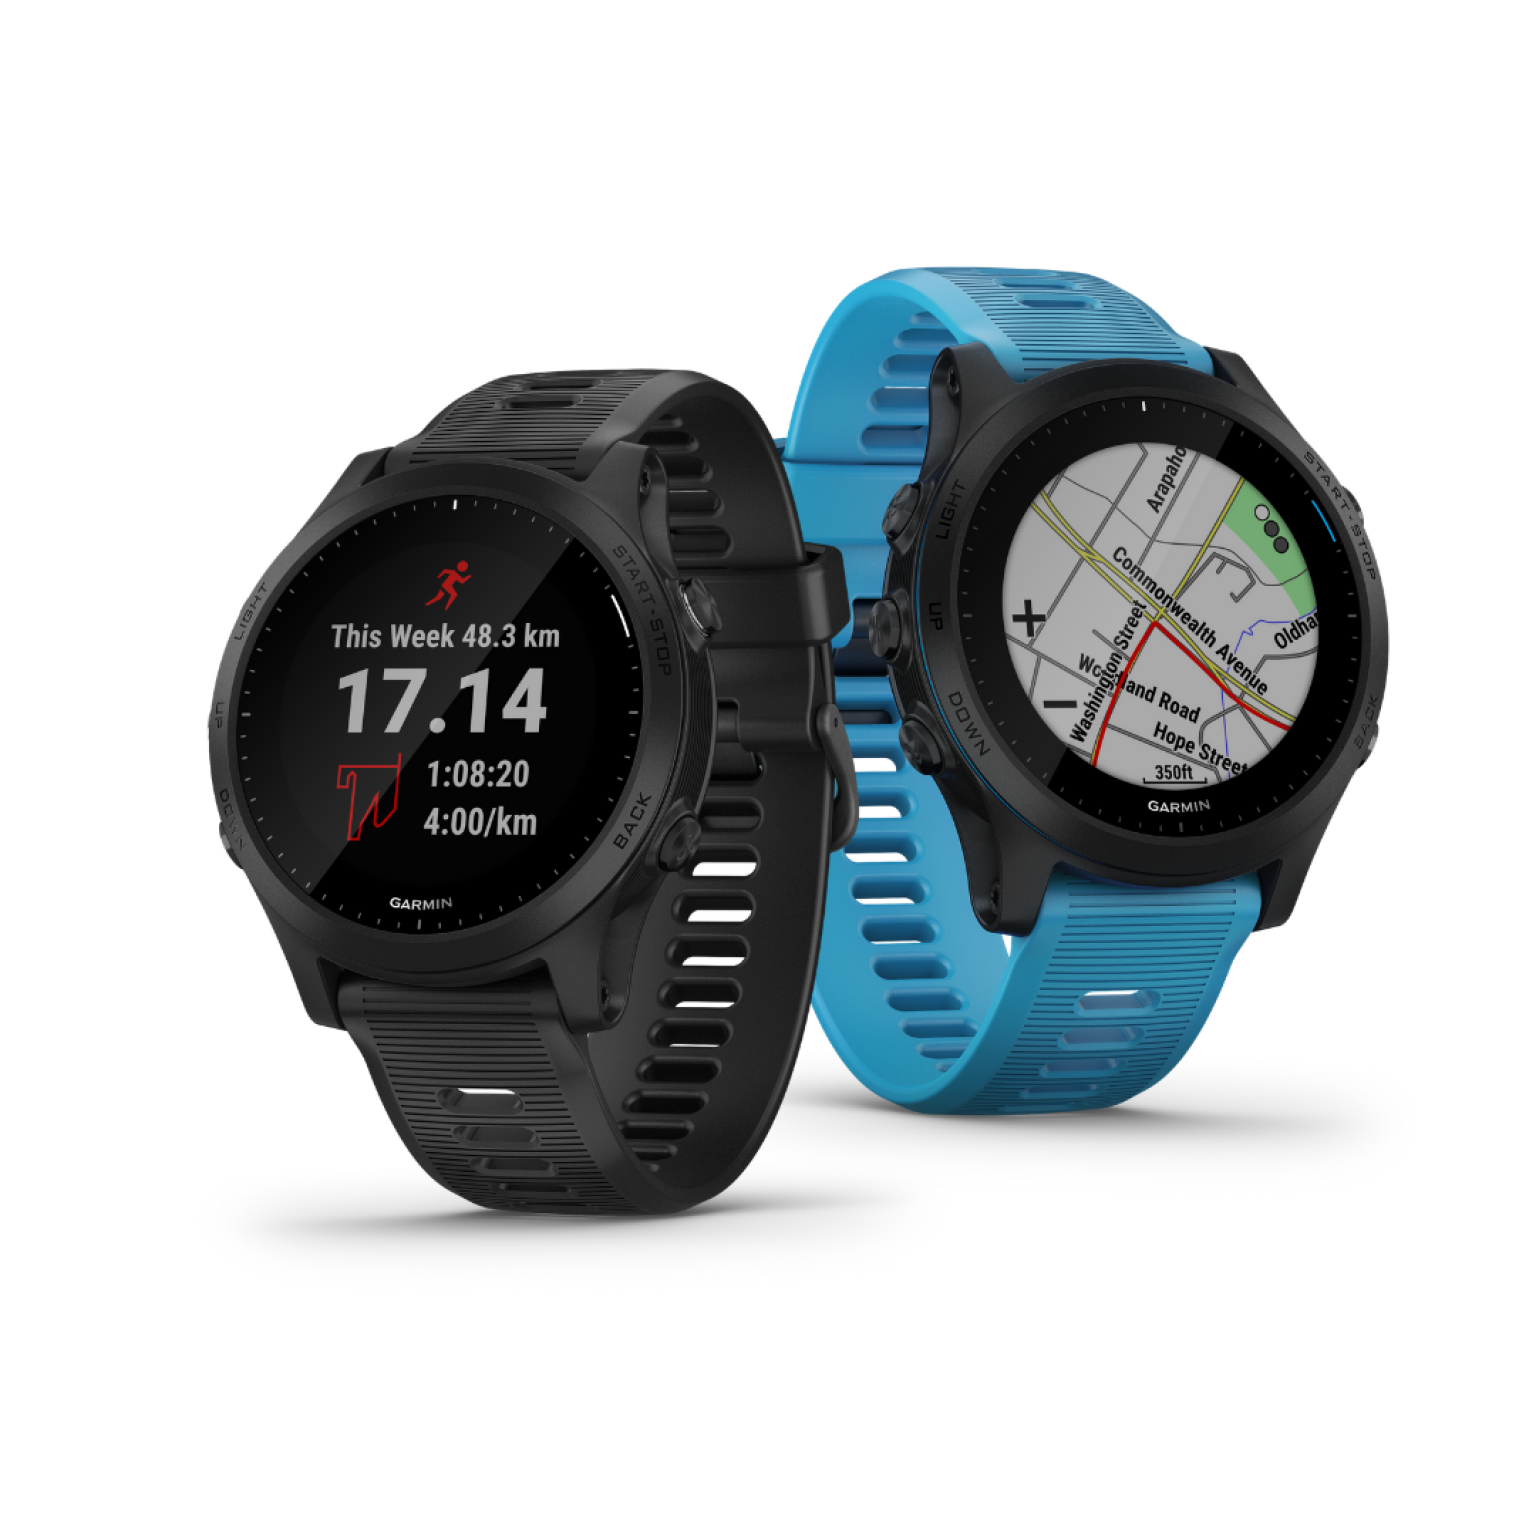 Garmin You Can Now Tradein Your Watch For Up To RM 300 Rebate The AXO